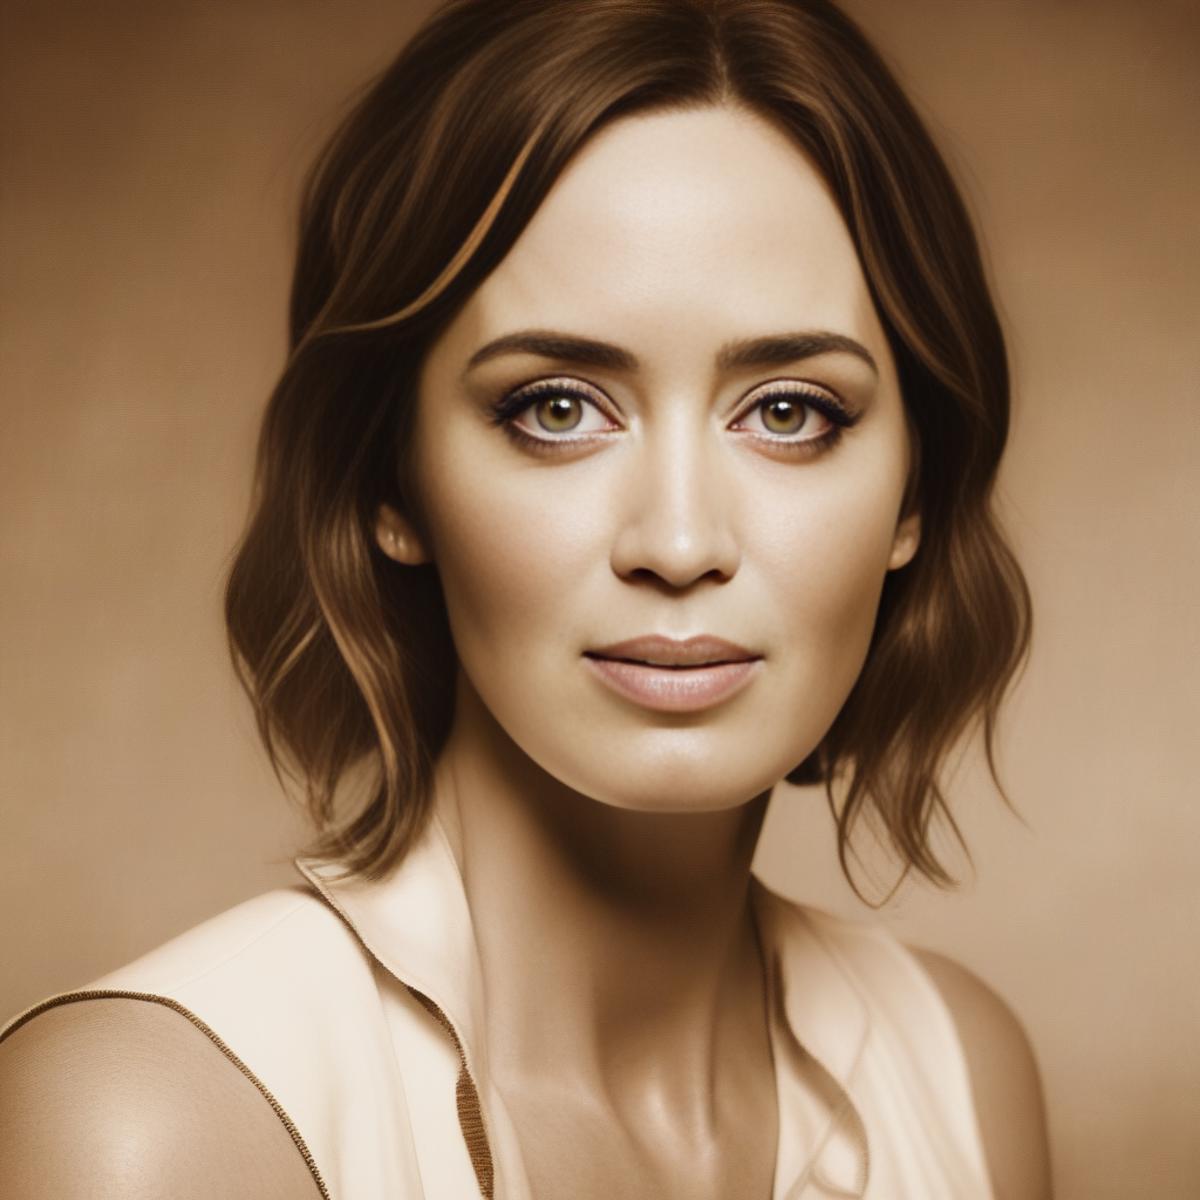 Emily Blunt image by parar20